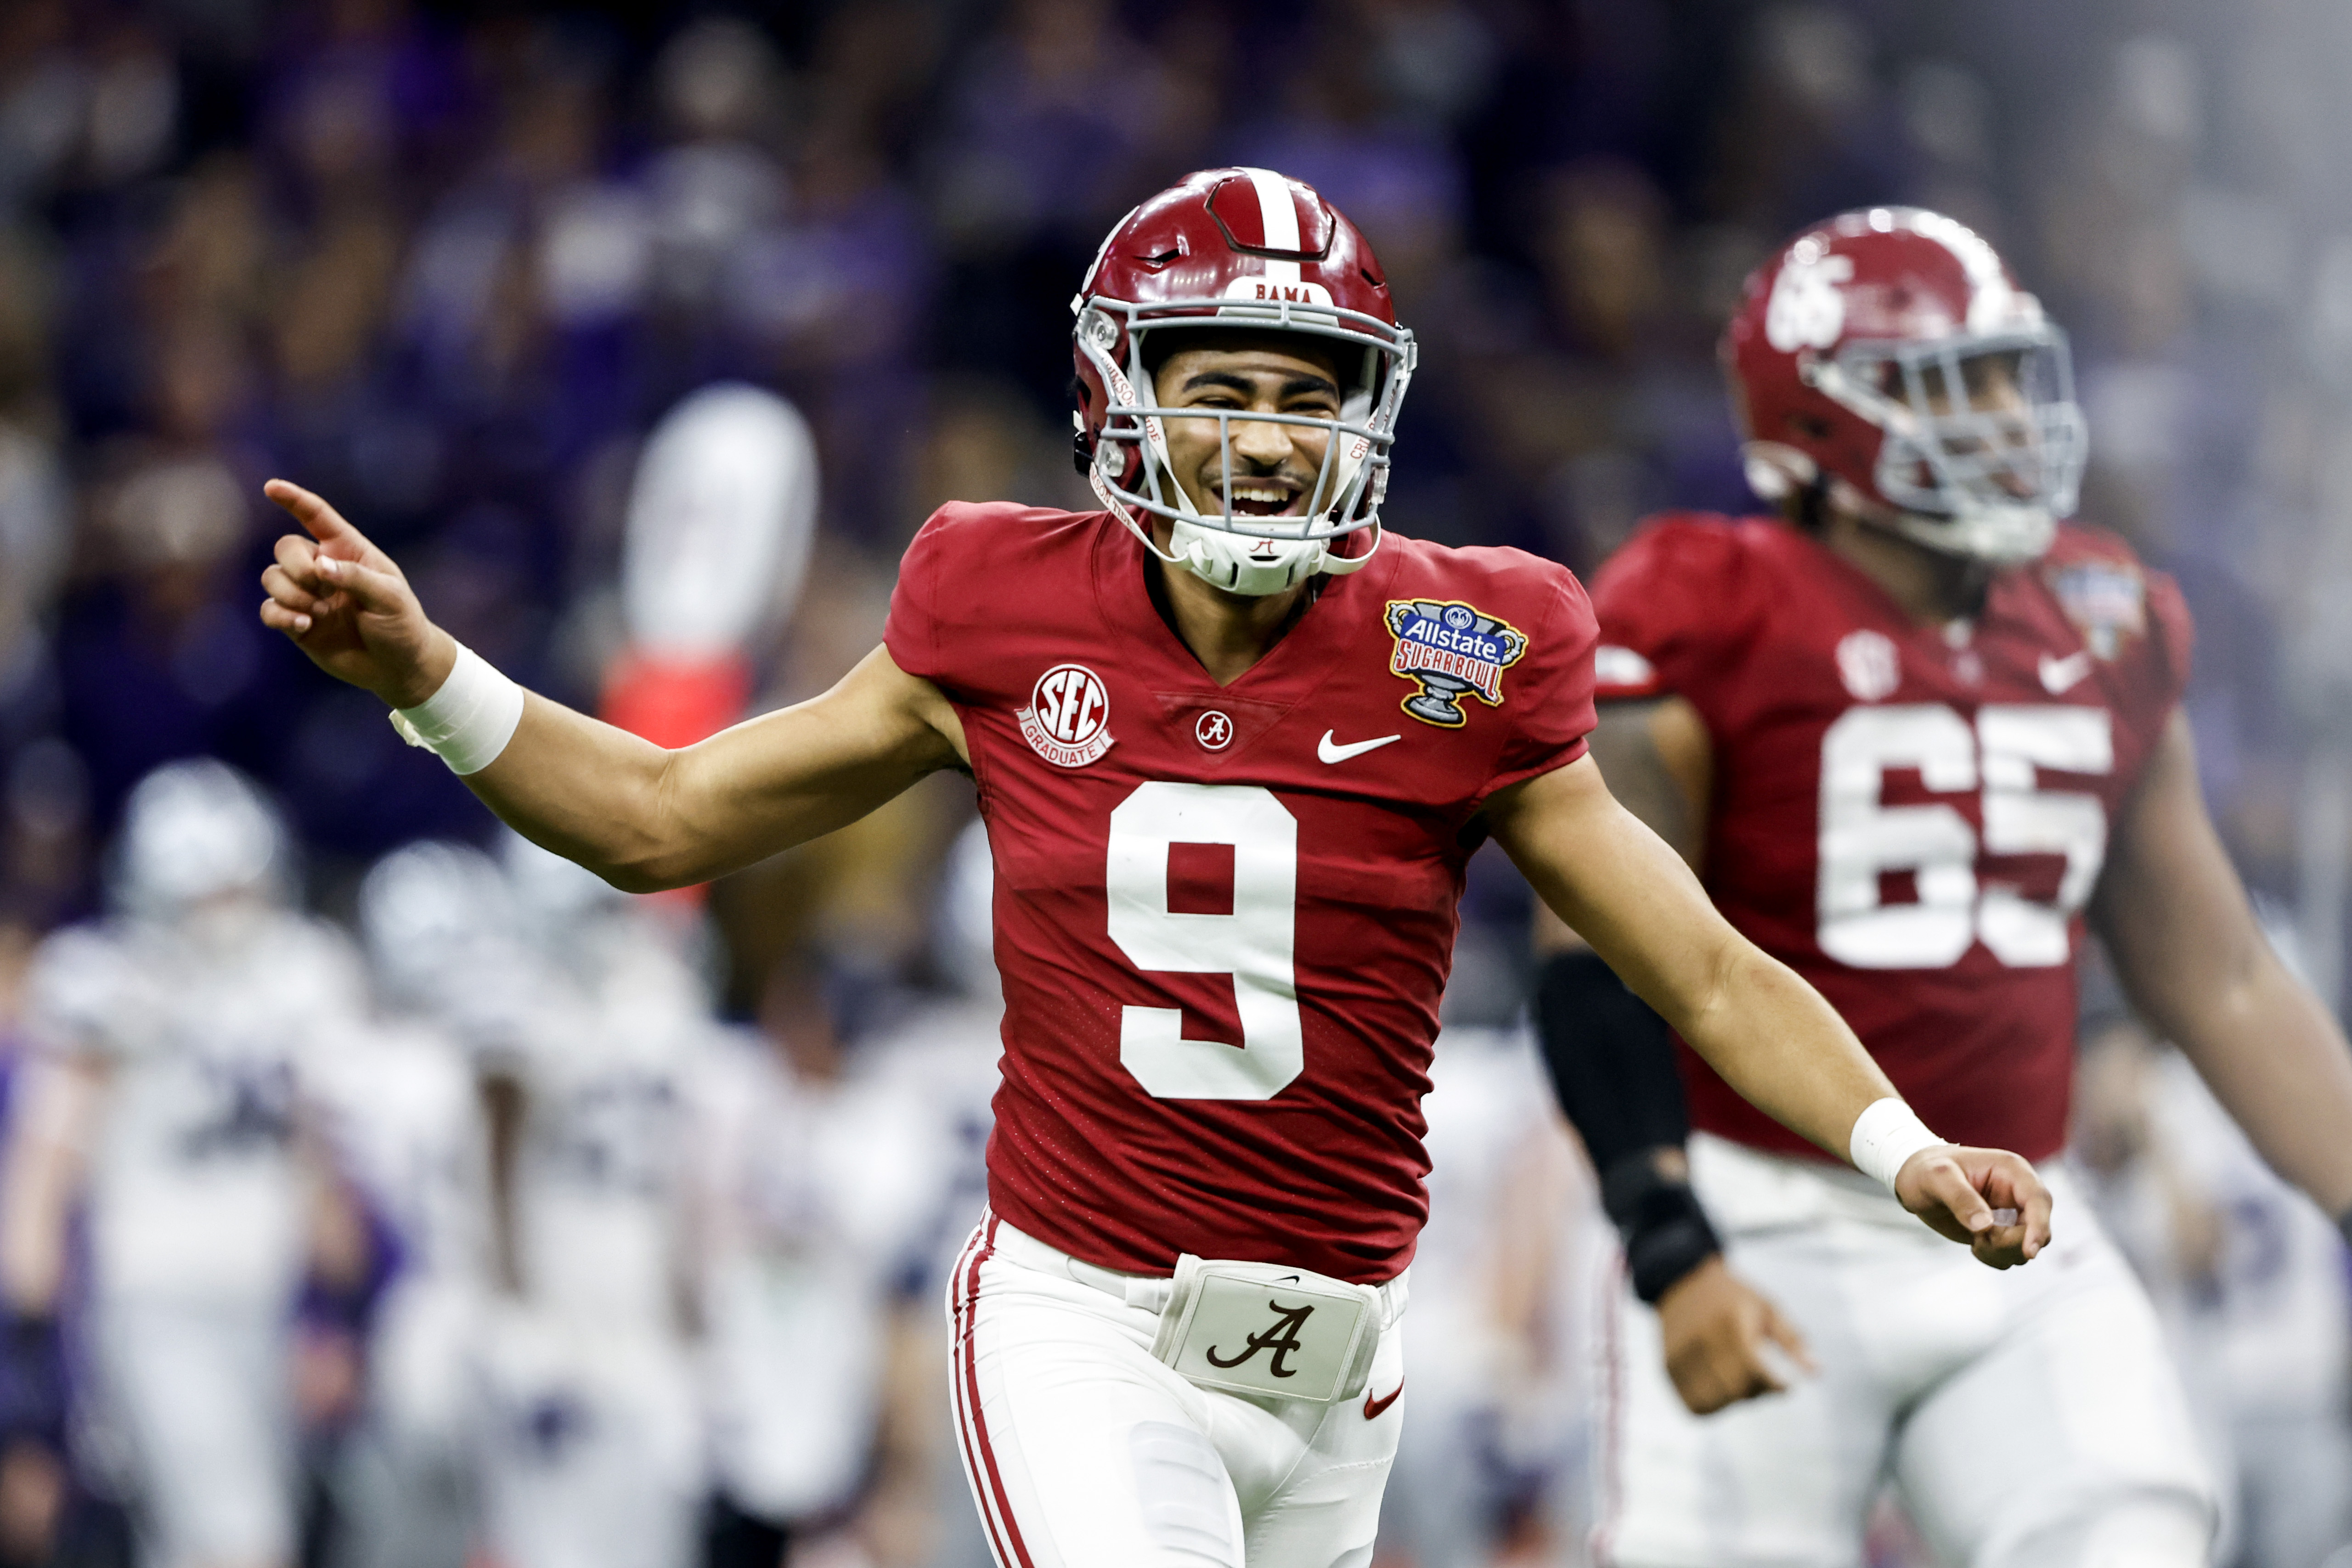 2023 NFL Draft: Ranking the 4 strongest position groups